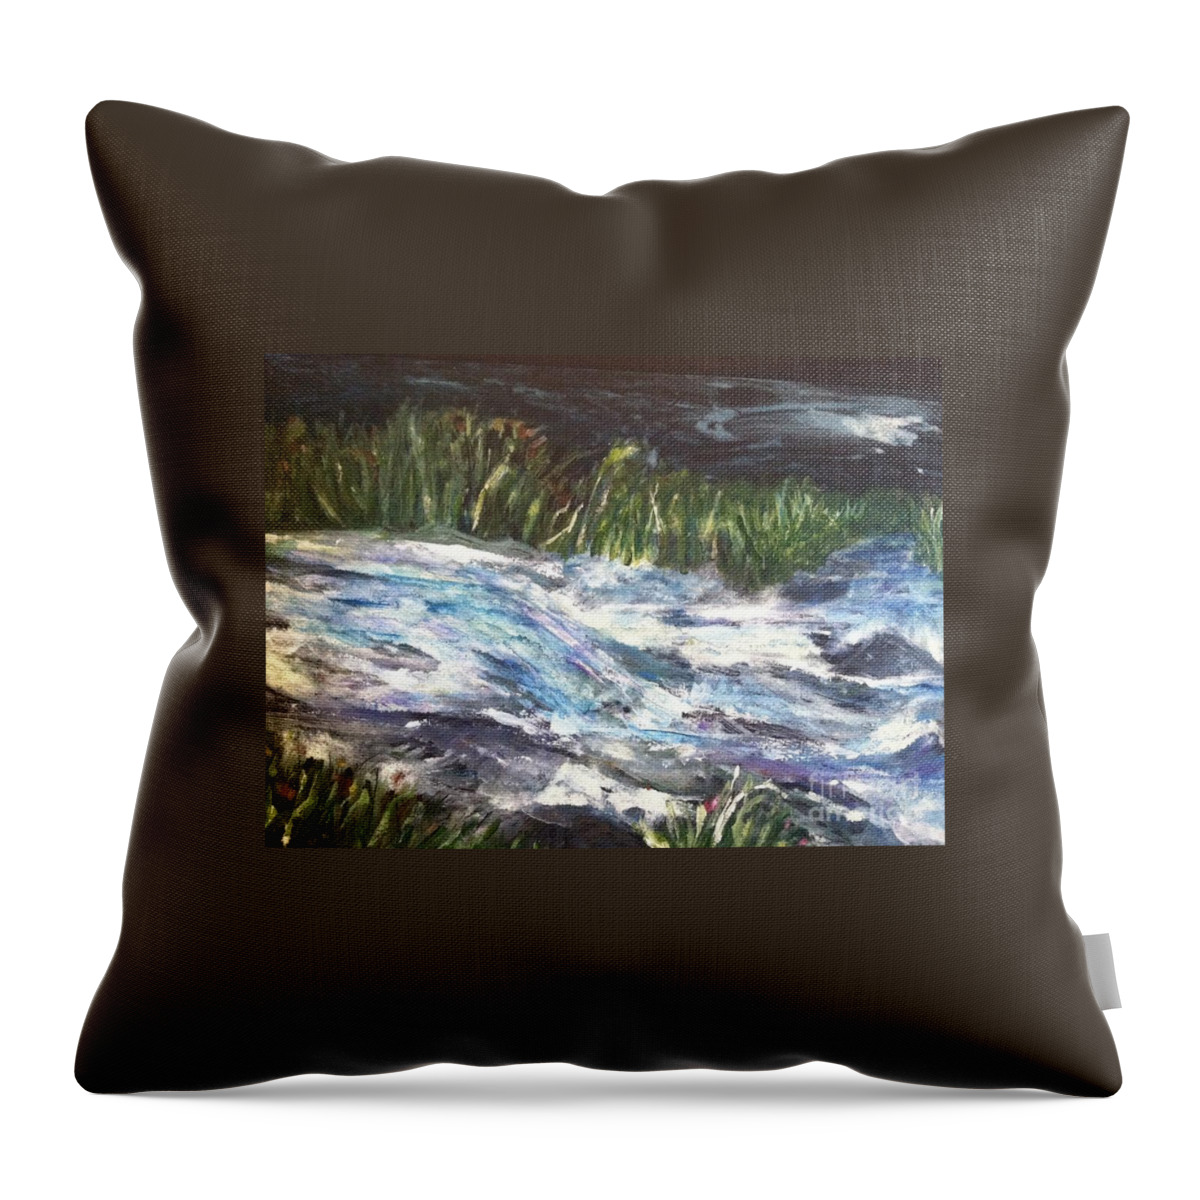 Orchards Throw Pillow featuring the painting A River Runs Through by Sherry Harradence